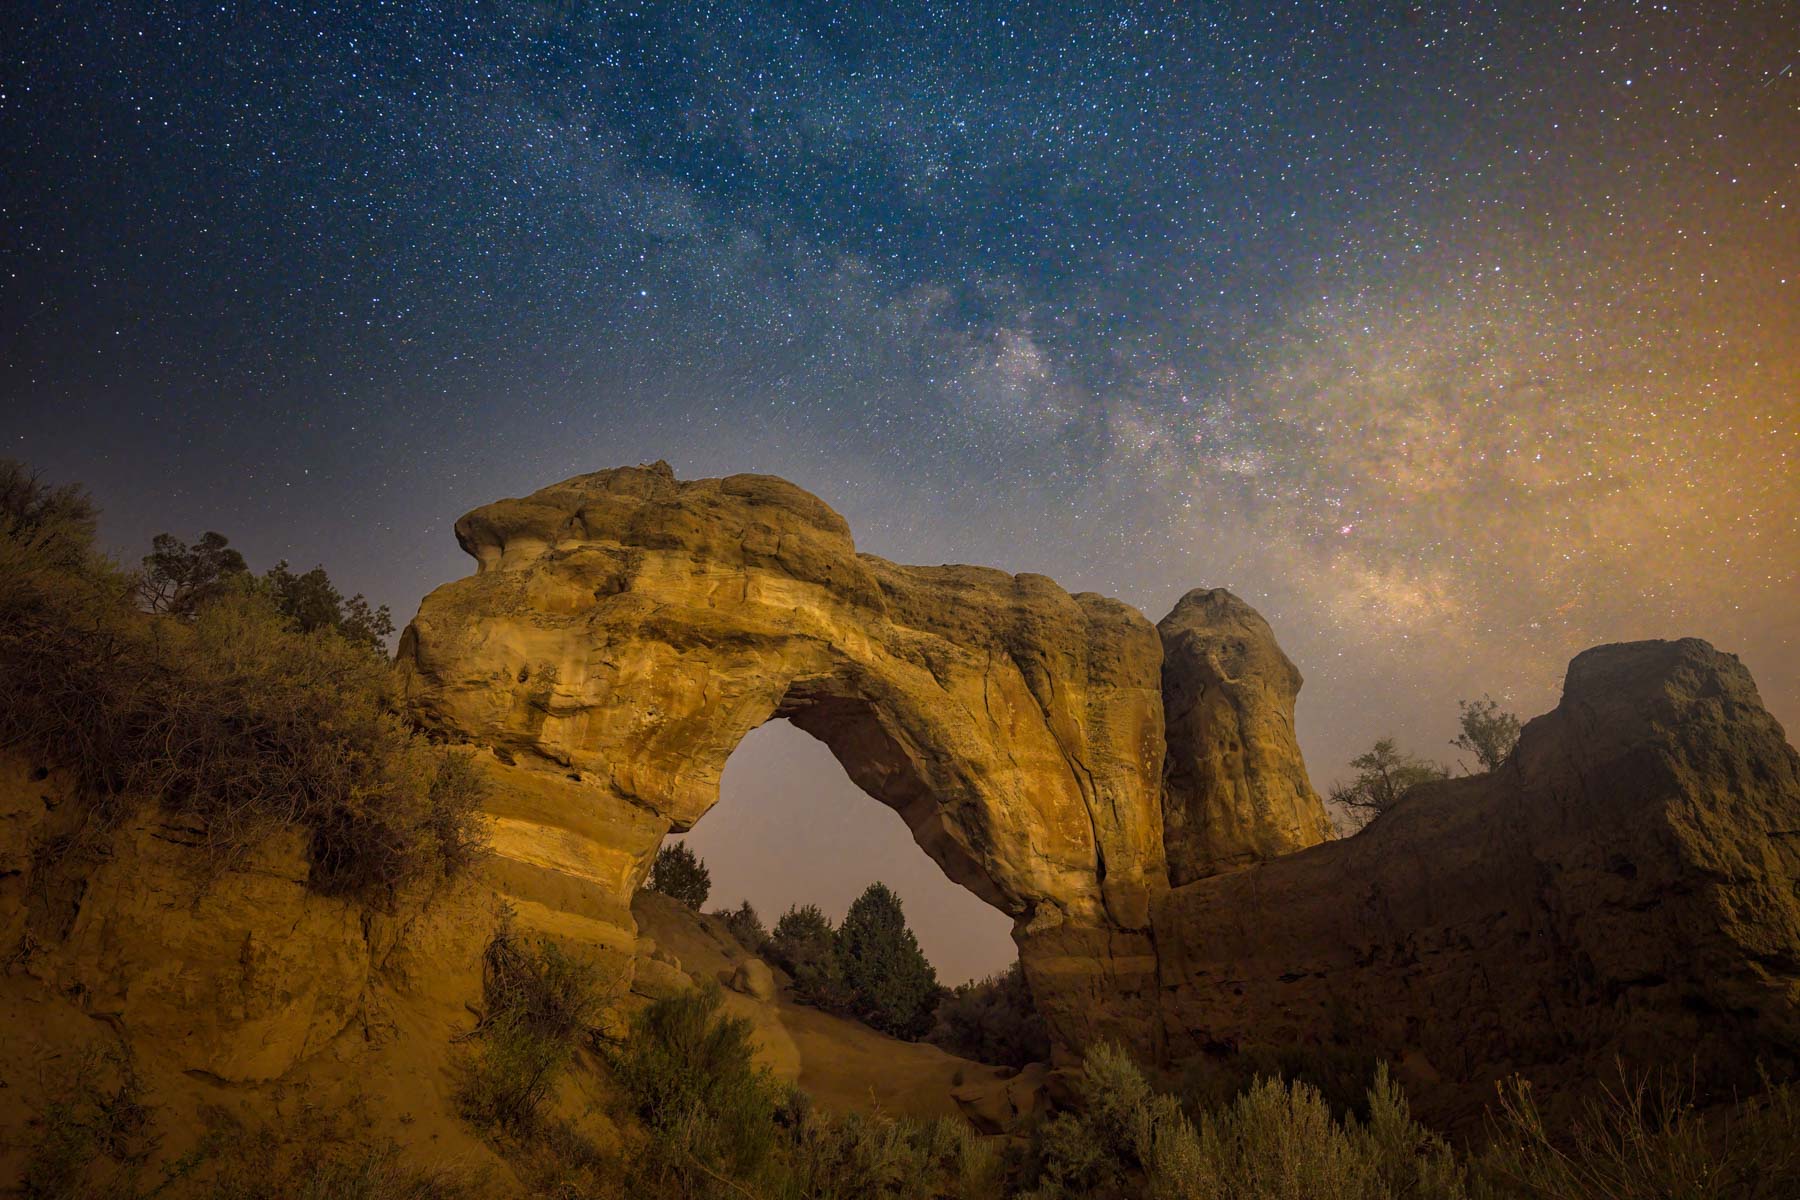 The Milky Way over Arch Rock near Aztec, New Mexico